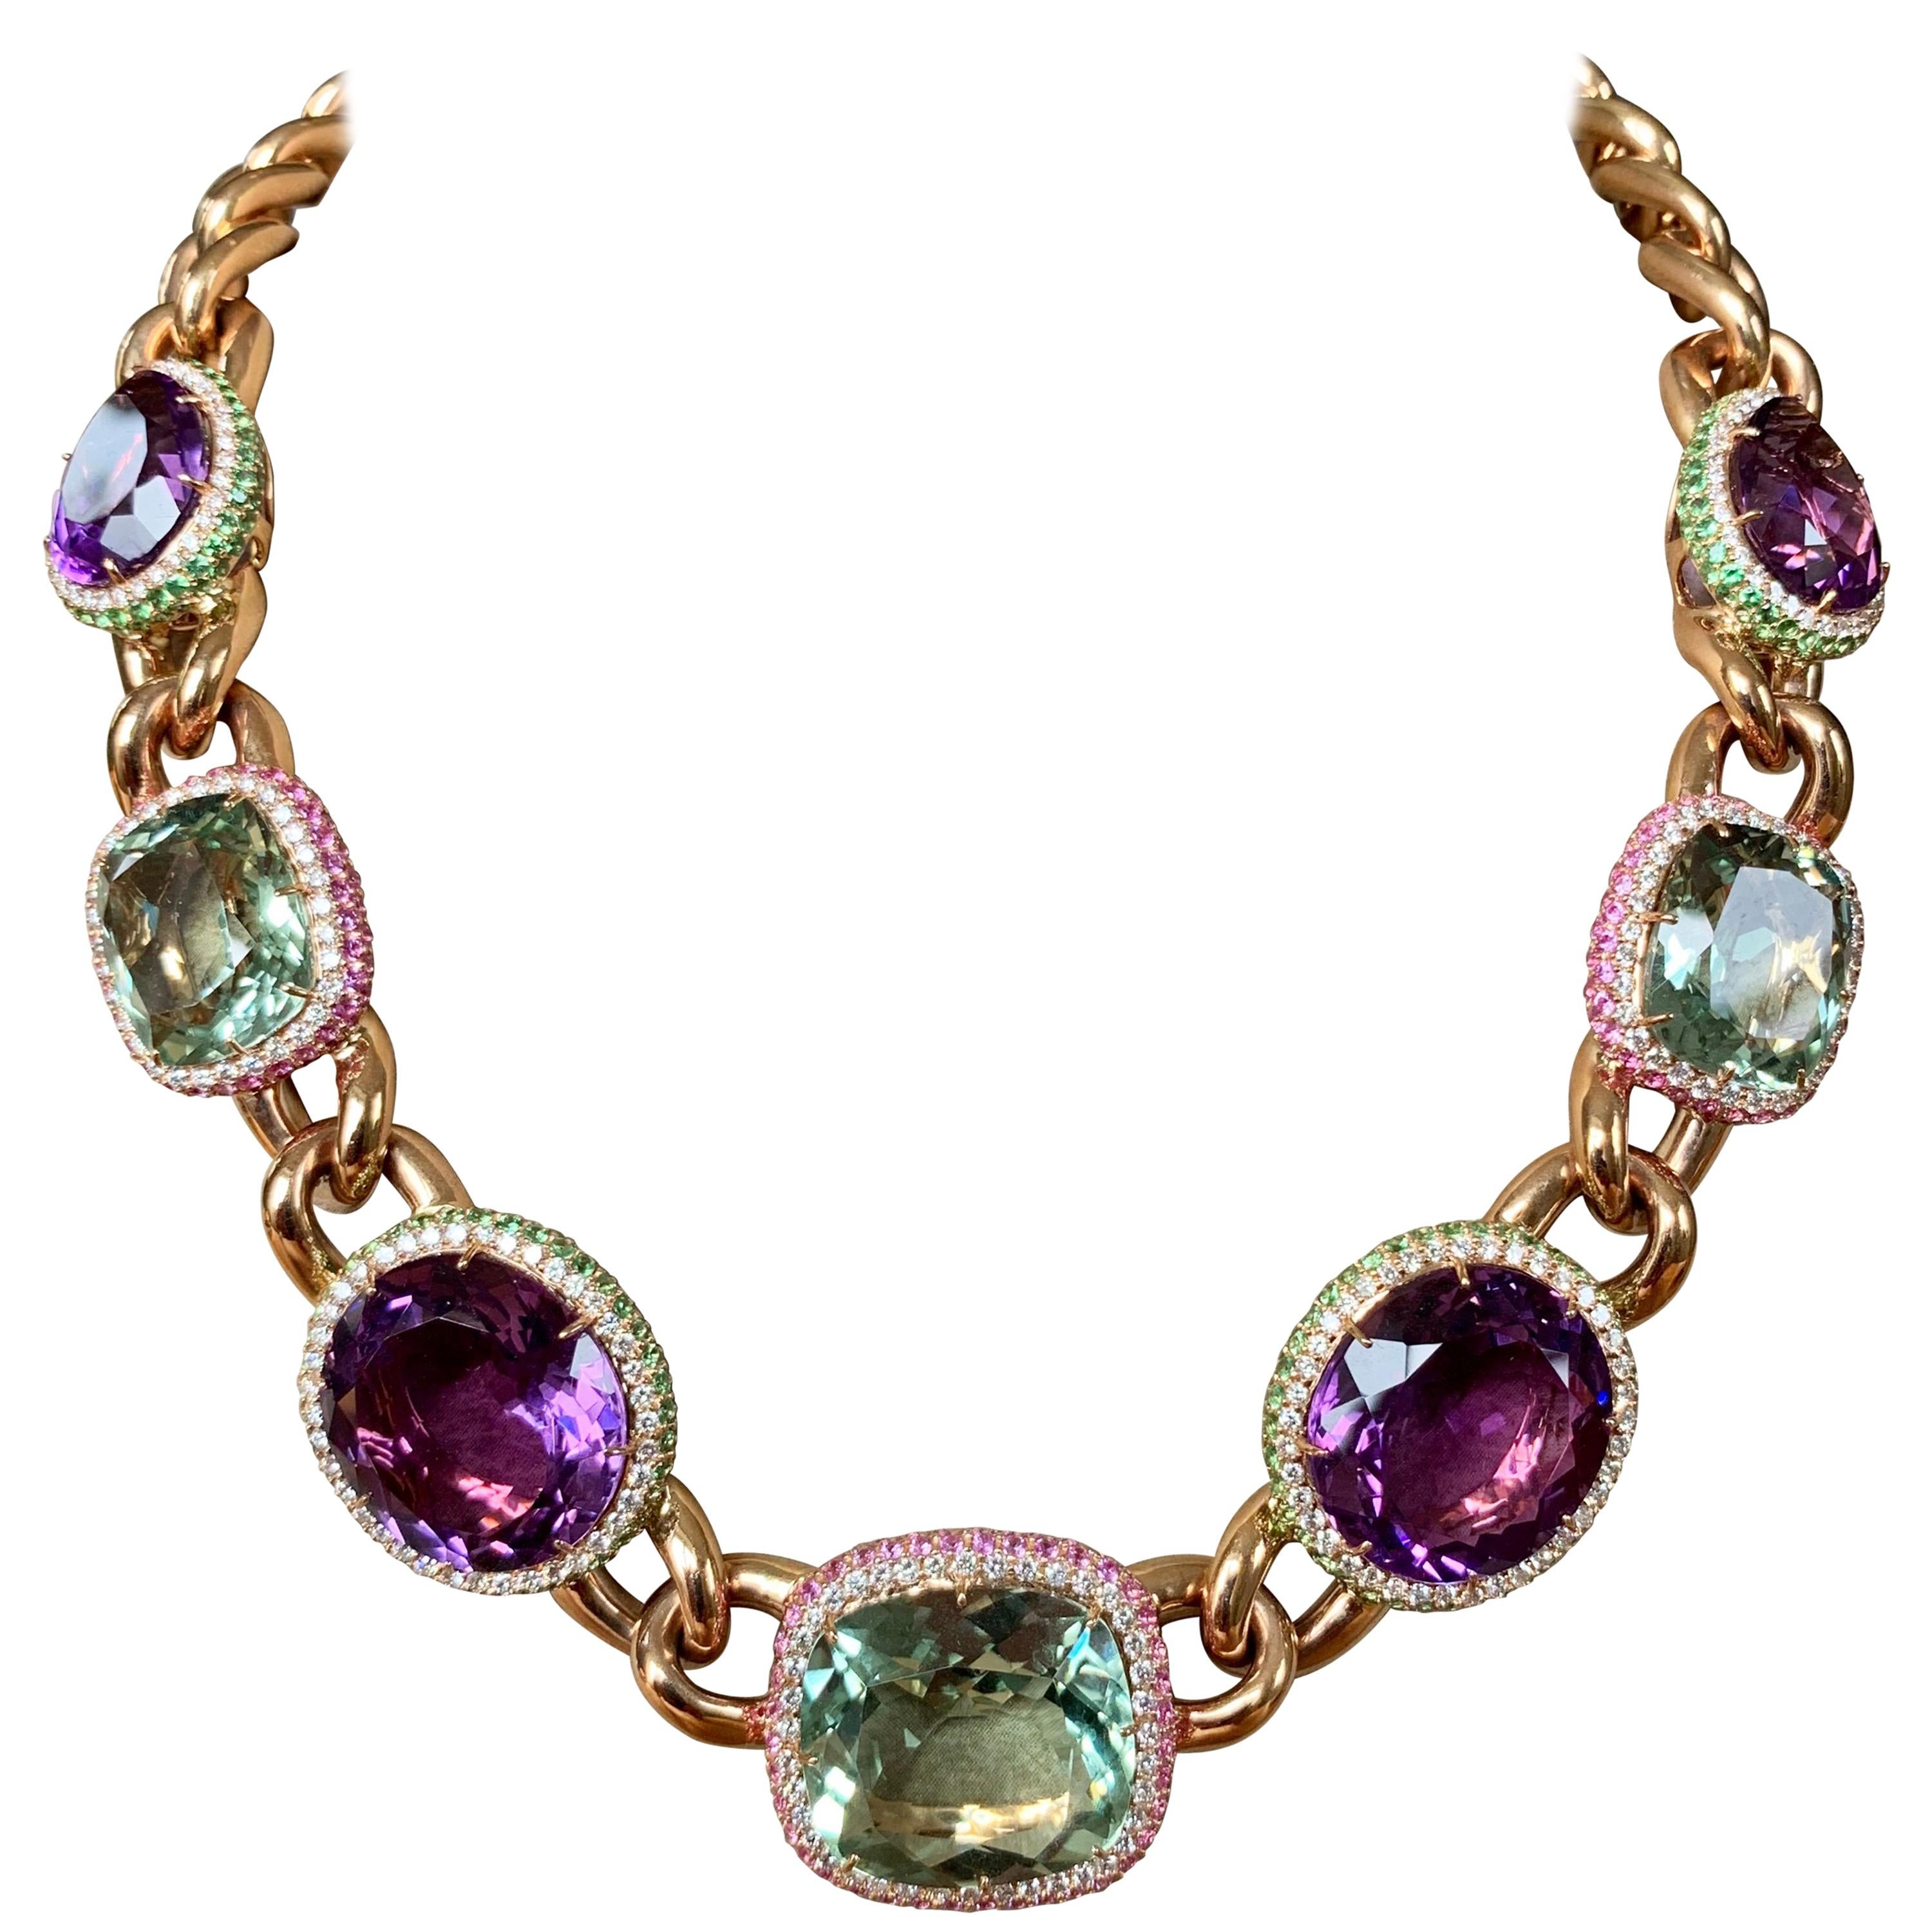 Stylish Big Bold Statement Necklace with Various Colored Stones